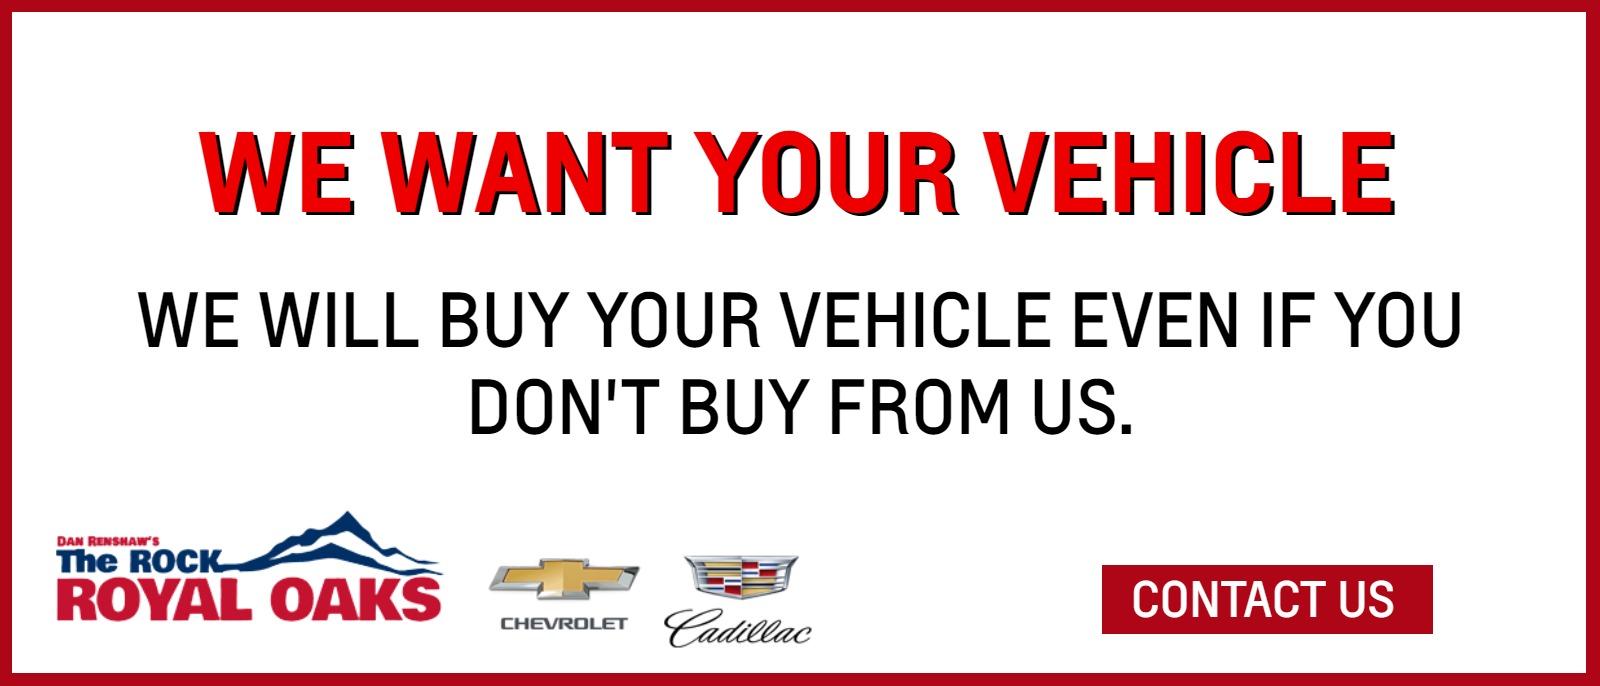 We want your vehicle
we will buy your vehicle even if you don't buy from us.